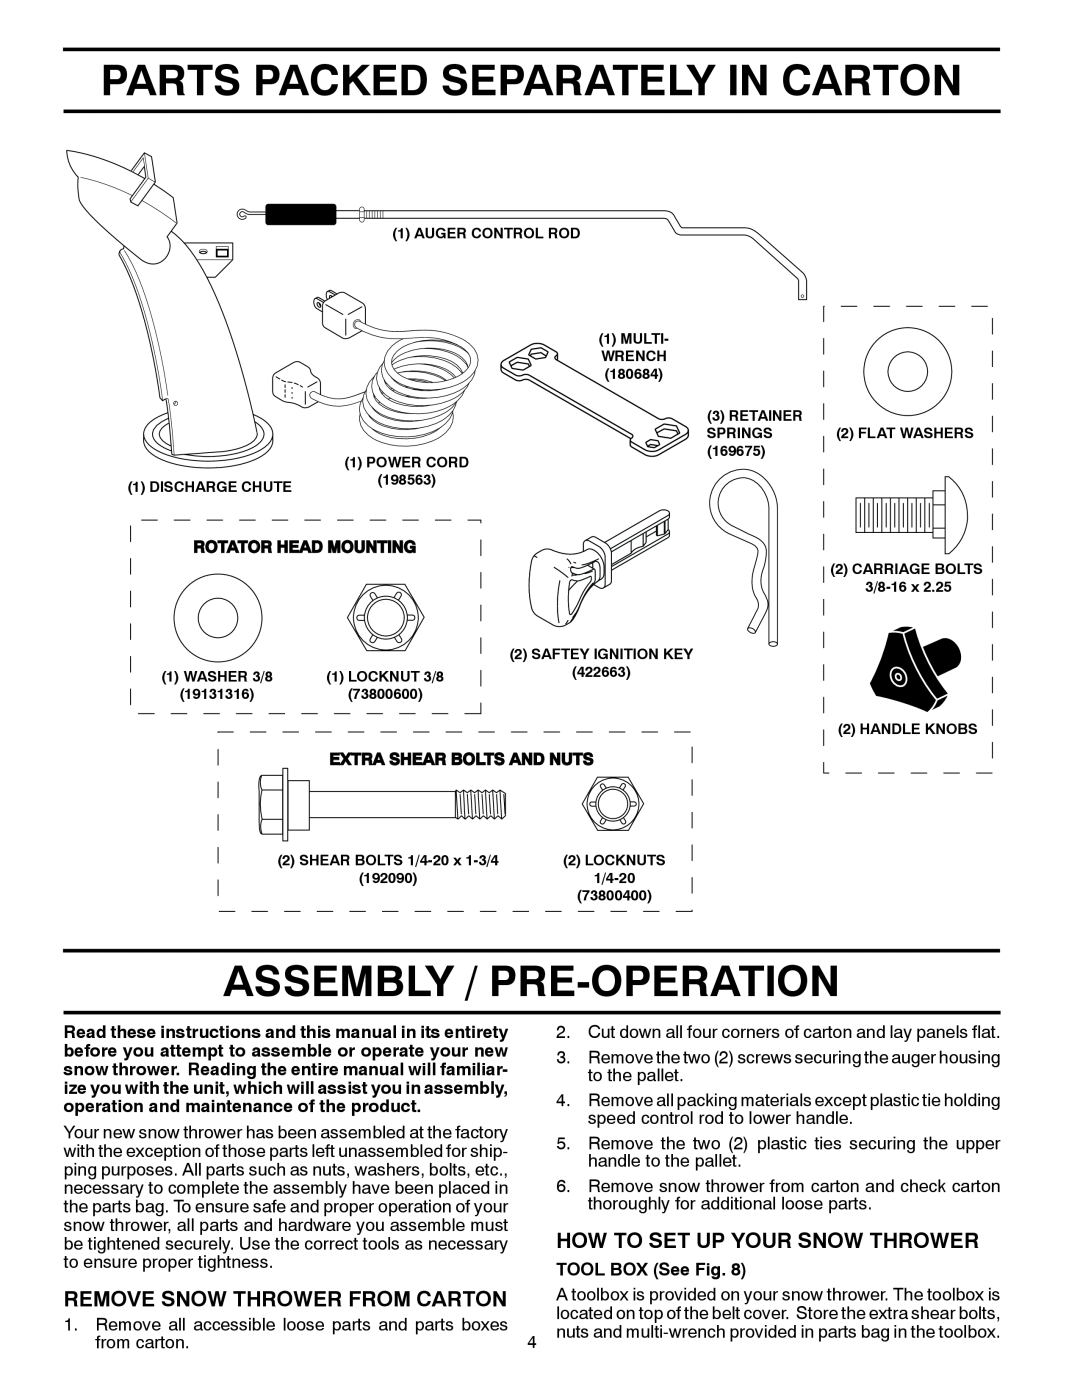 Poulan 428701, 96198002601 Parts Packed Separately In Carton, Assembly / Pre-Operation, How To Set Up Your Snow Thrower 